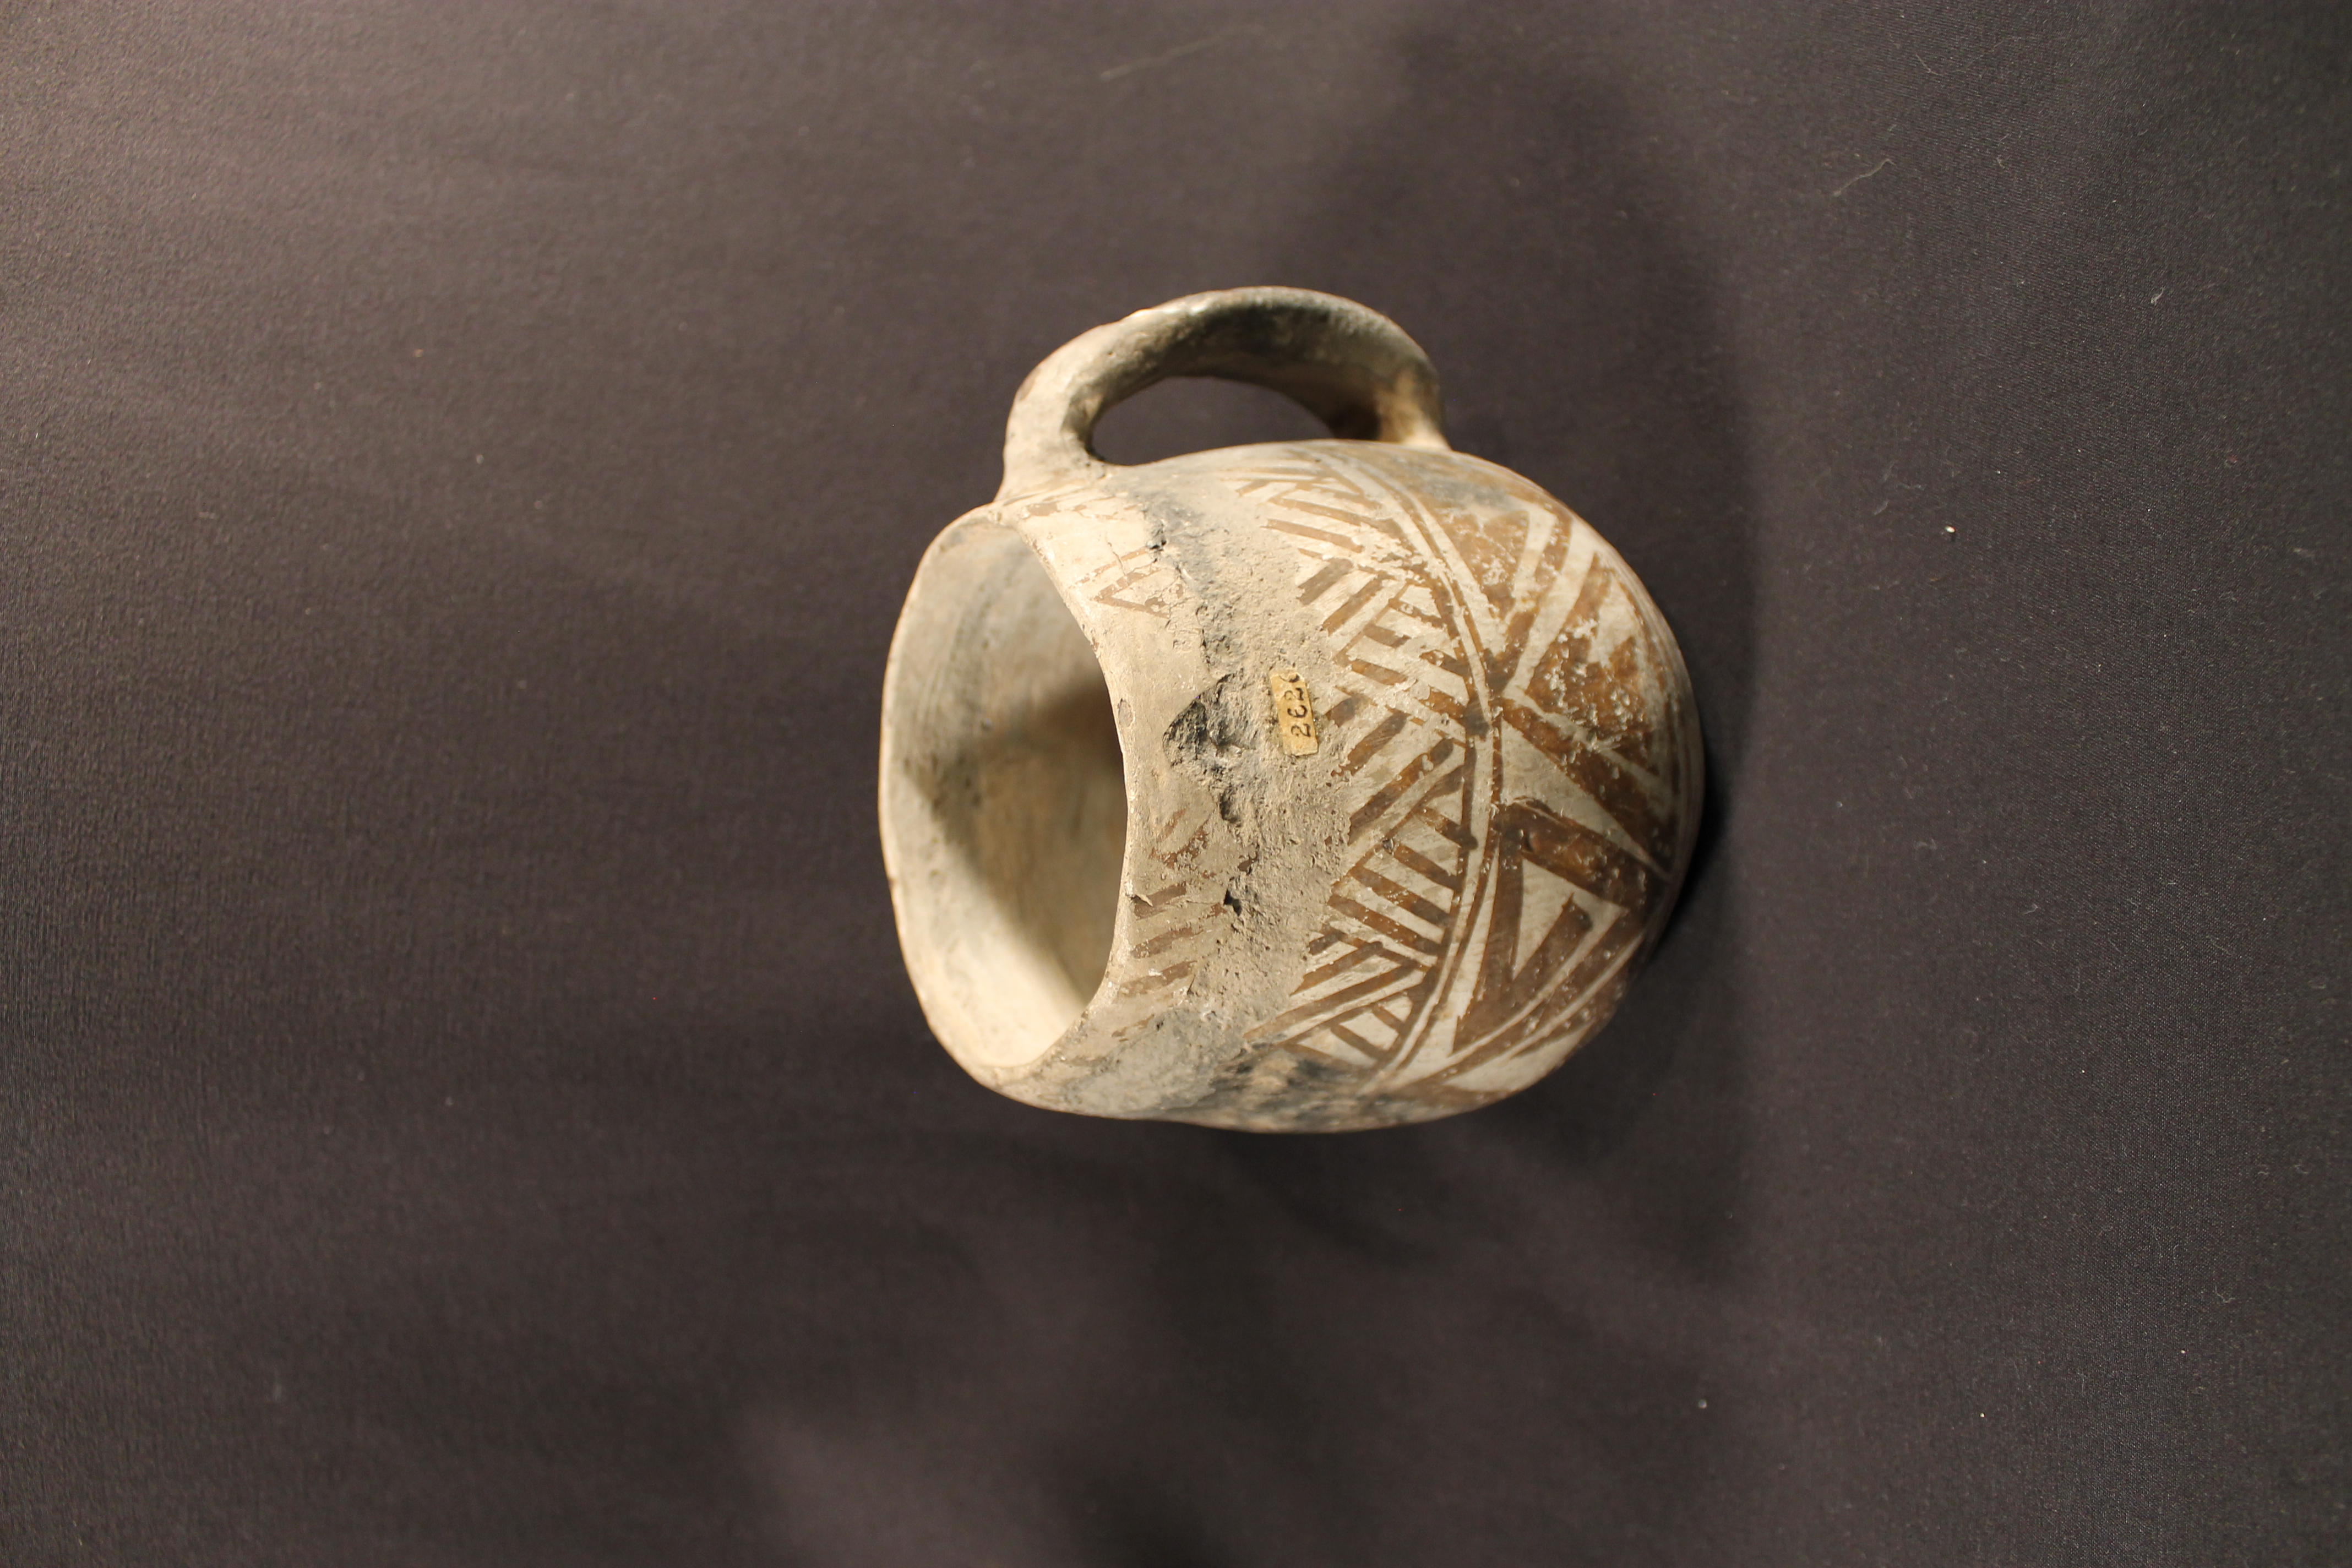 Ceramic handled mug with diamond pattern and perpendicular lines painted in reddish black on the surface.